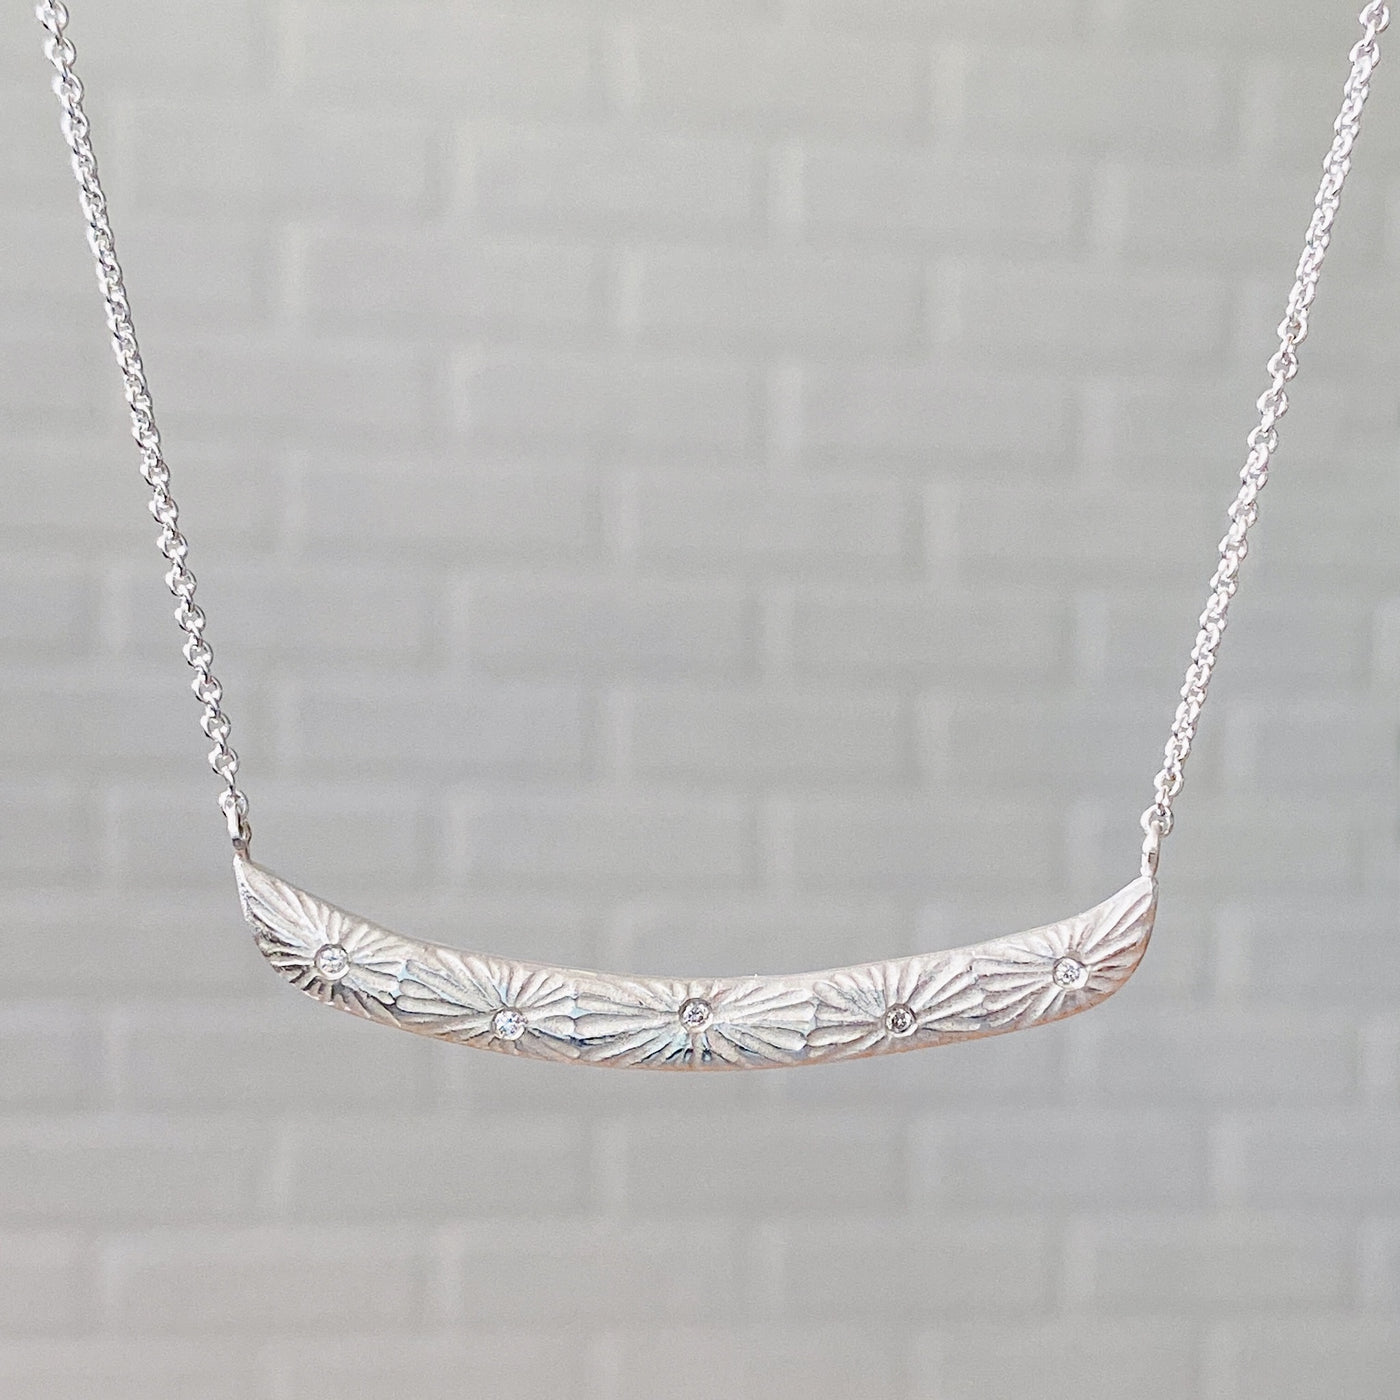 Sterling silver curved bar necklace with five scattered diamonds and an engraved sunburst pattern radiating from each in natural light | Corey Egan